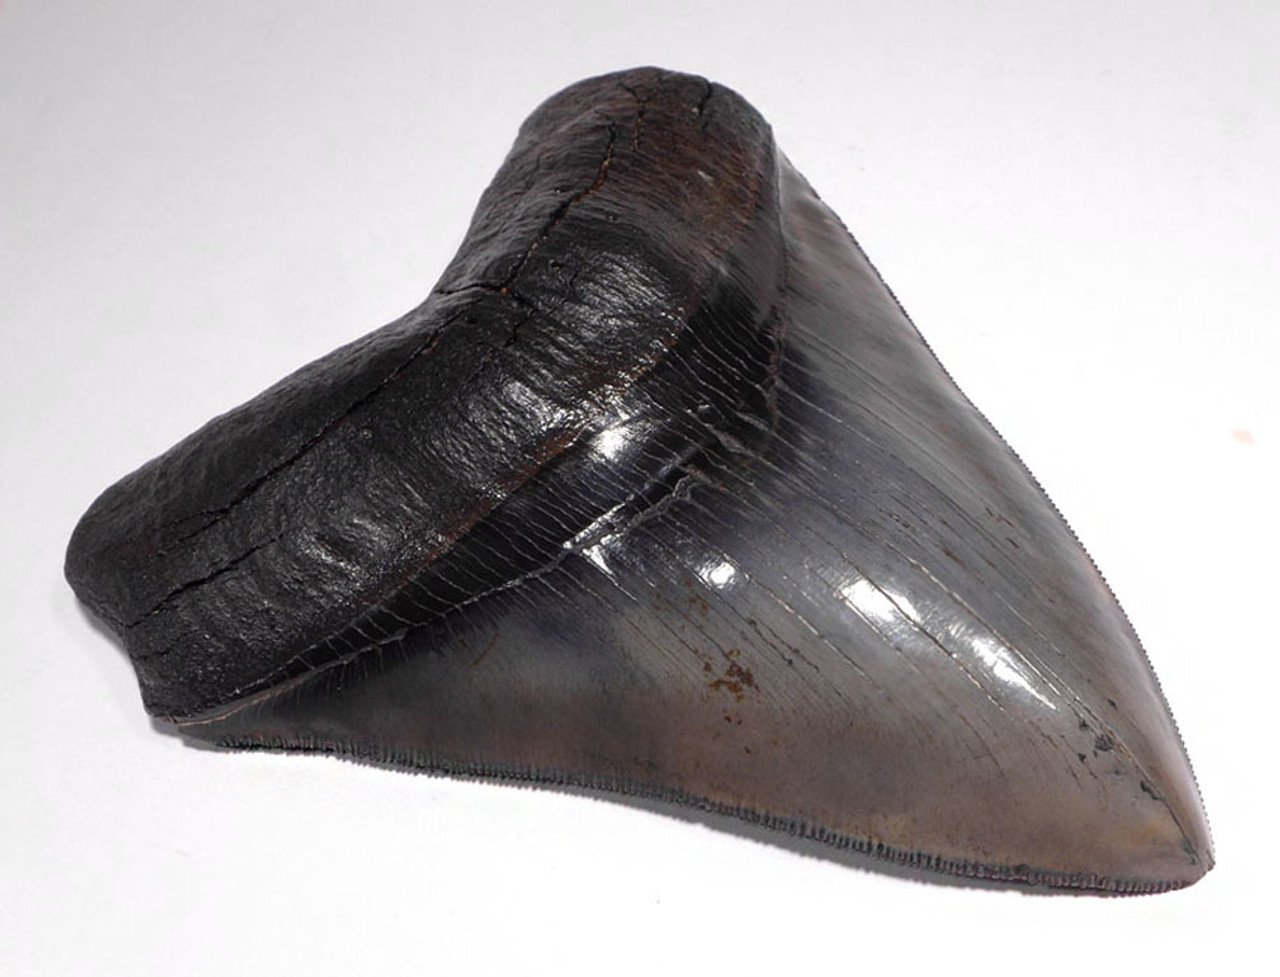 SH6-357 -  INVESTMENT CLASS 5.5 INCH MEGALODON SHARK TOOTH WITH SHARP SERRATIONS AND CHATOYANT ENAMEL